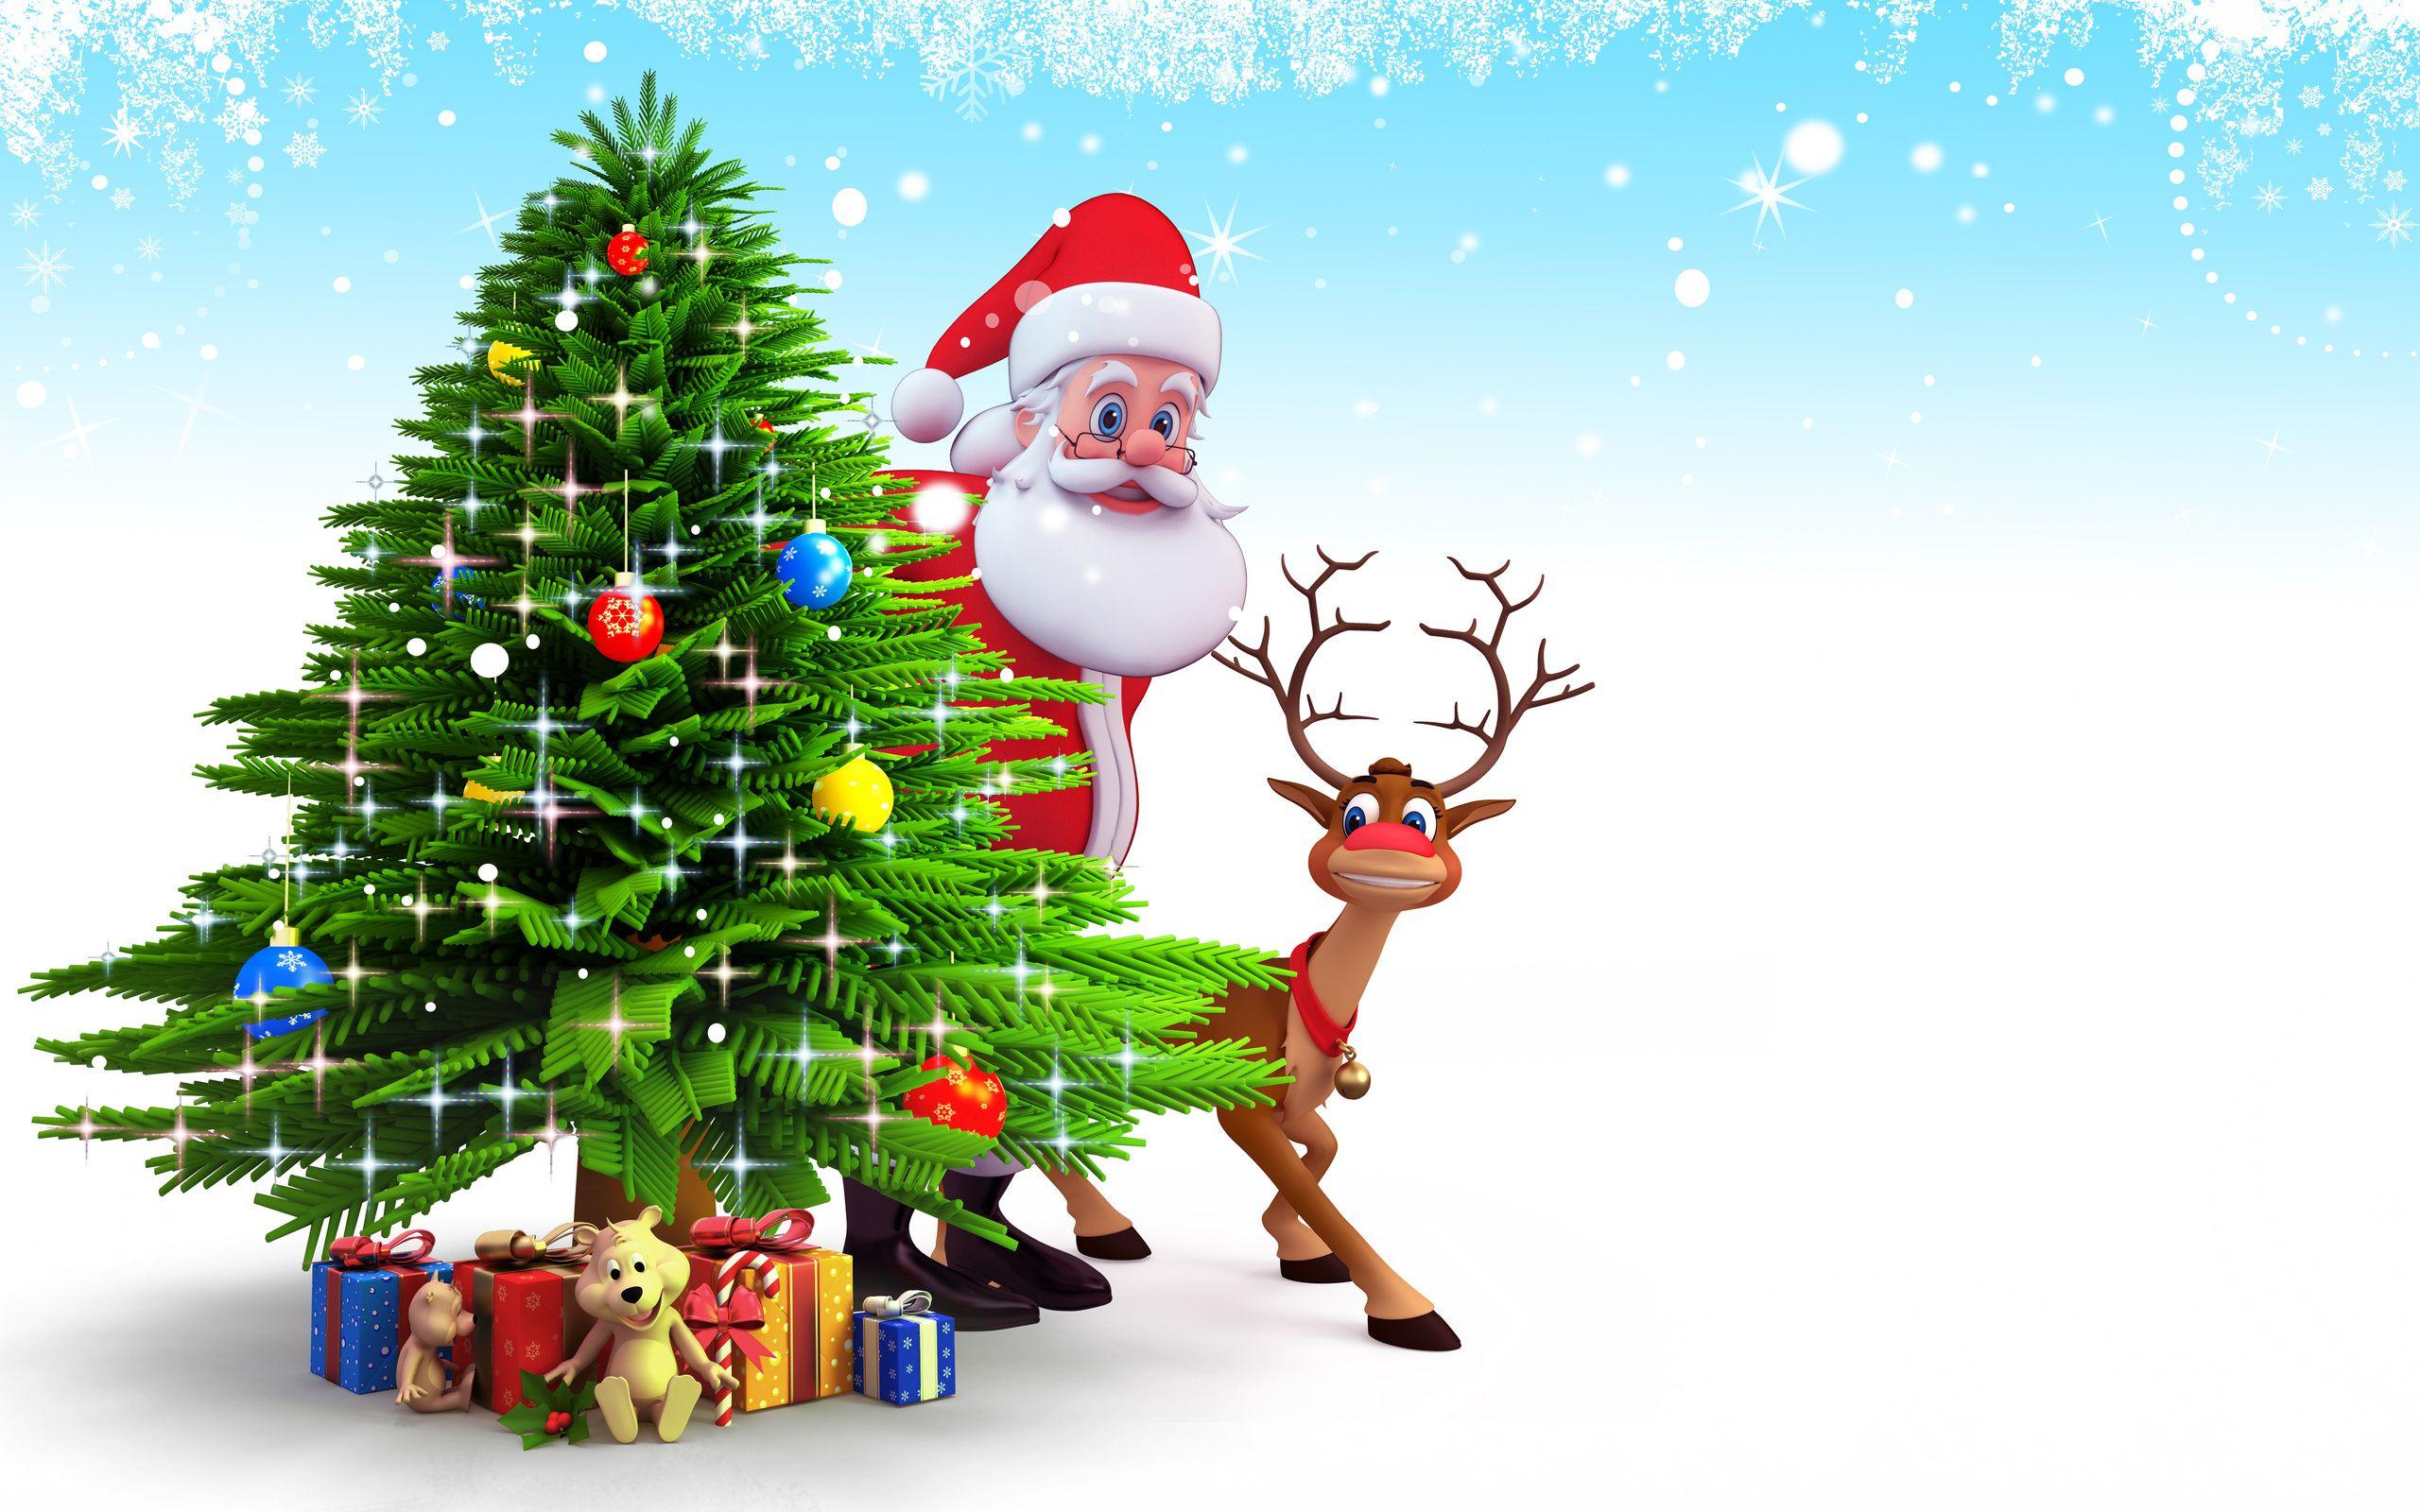 Cute cartoon wallpaper with Christmas 3D animation theme for kids and children facebook. Merry christmas image, Christmas wallpaper free, Cartoon christmas tree